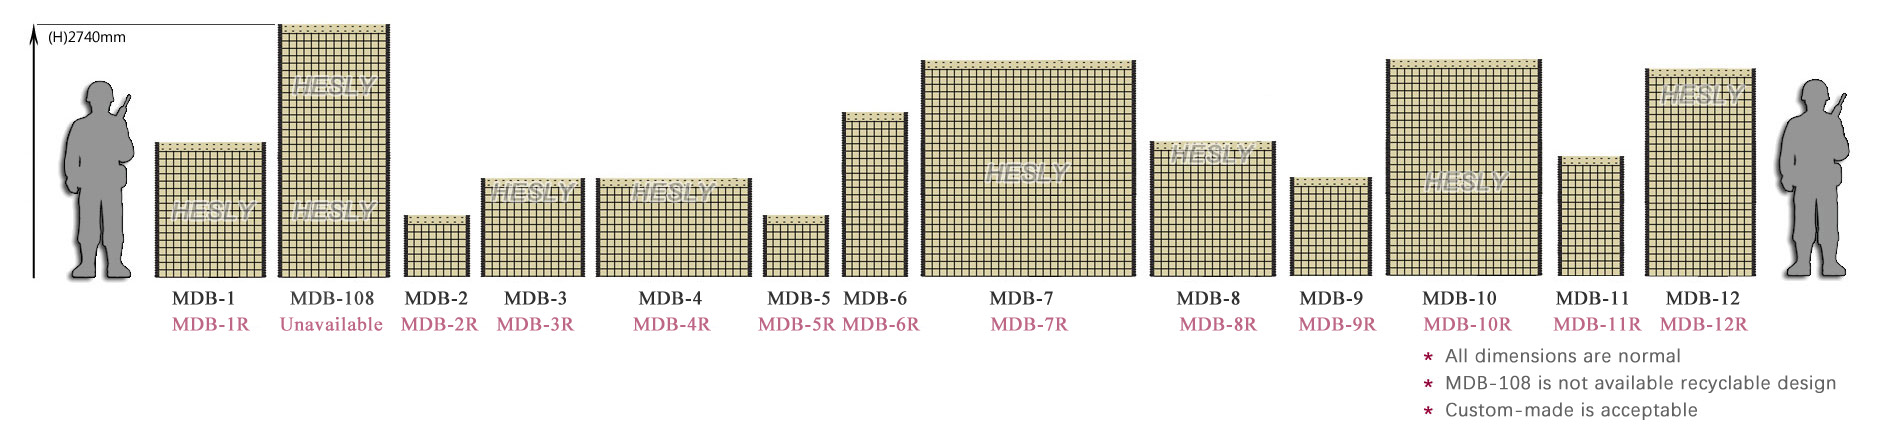 Military Defensive Barrier Dimensions